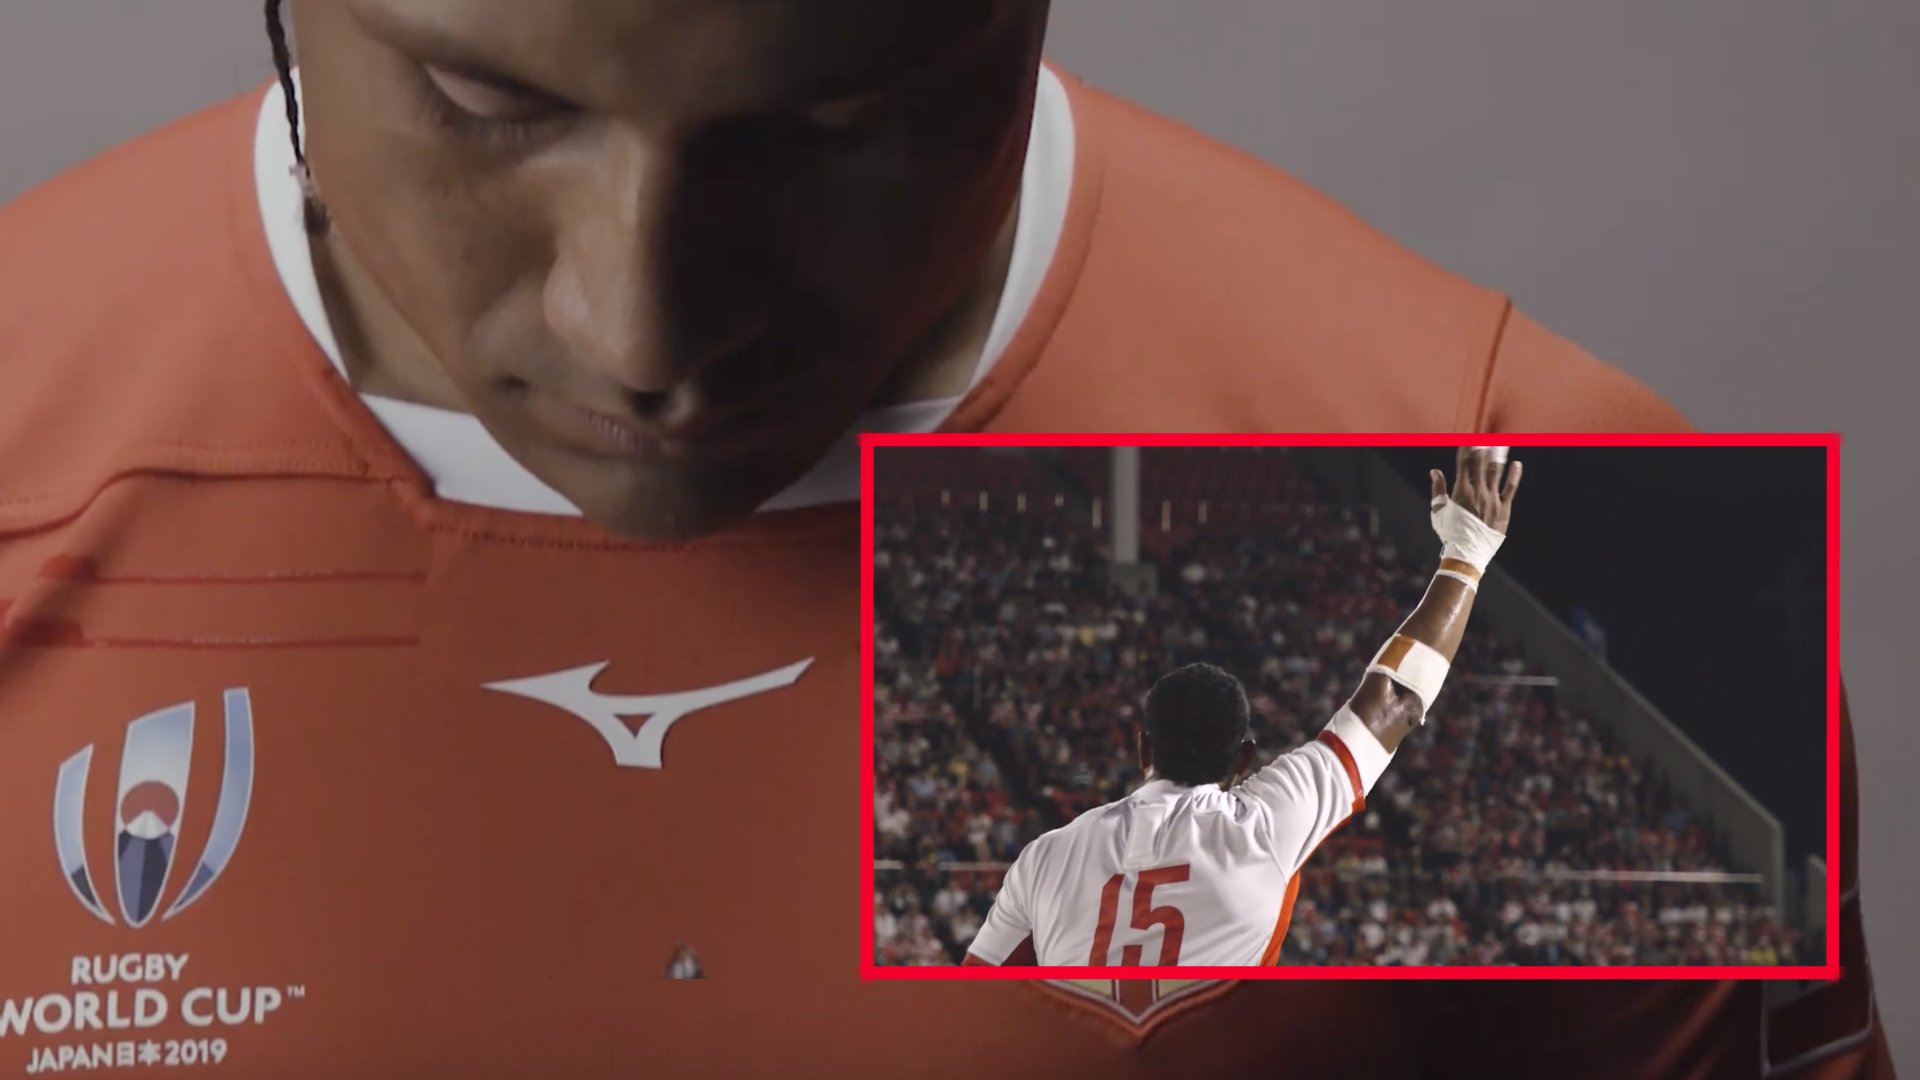 Stunning Tonga World Cup advert will leave you wanting to support them at the World Cup